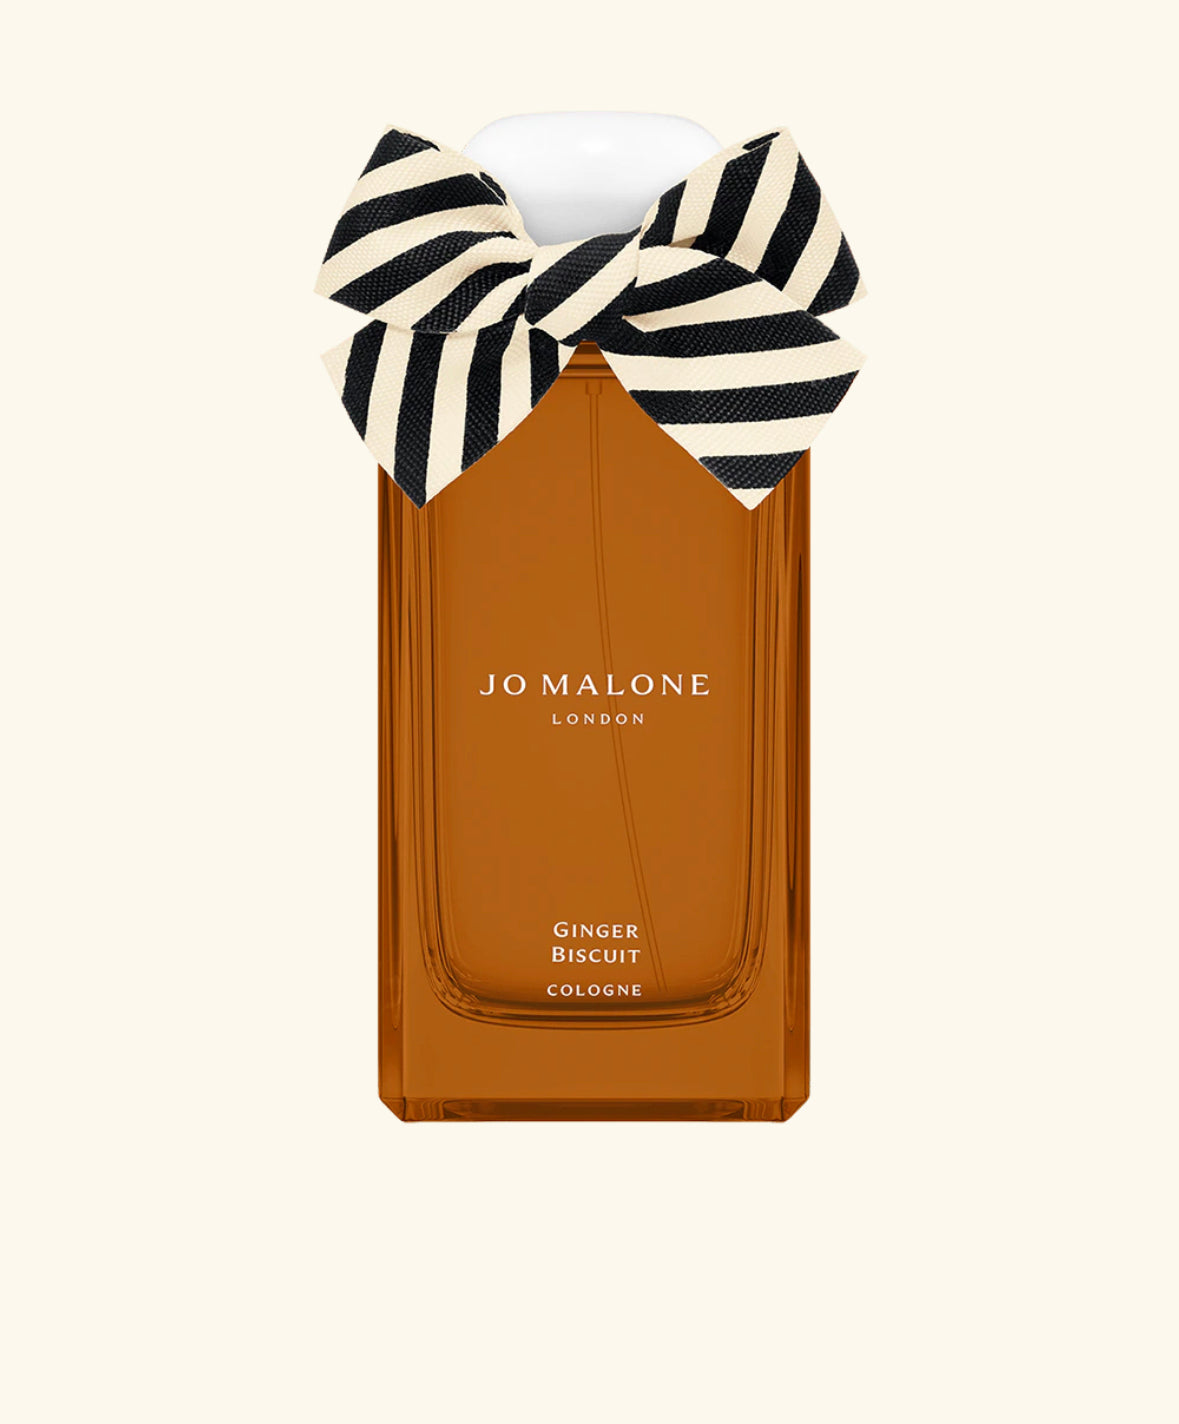 Jo Malone LIMITED EDITION
Ginger Biscuit Cologne 100ml